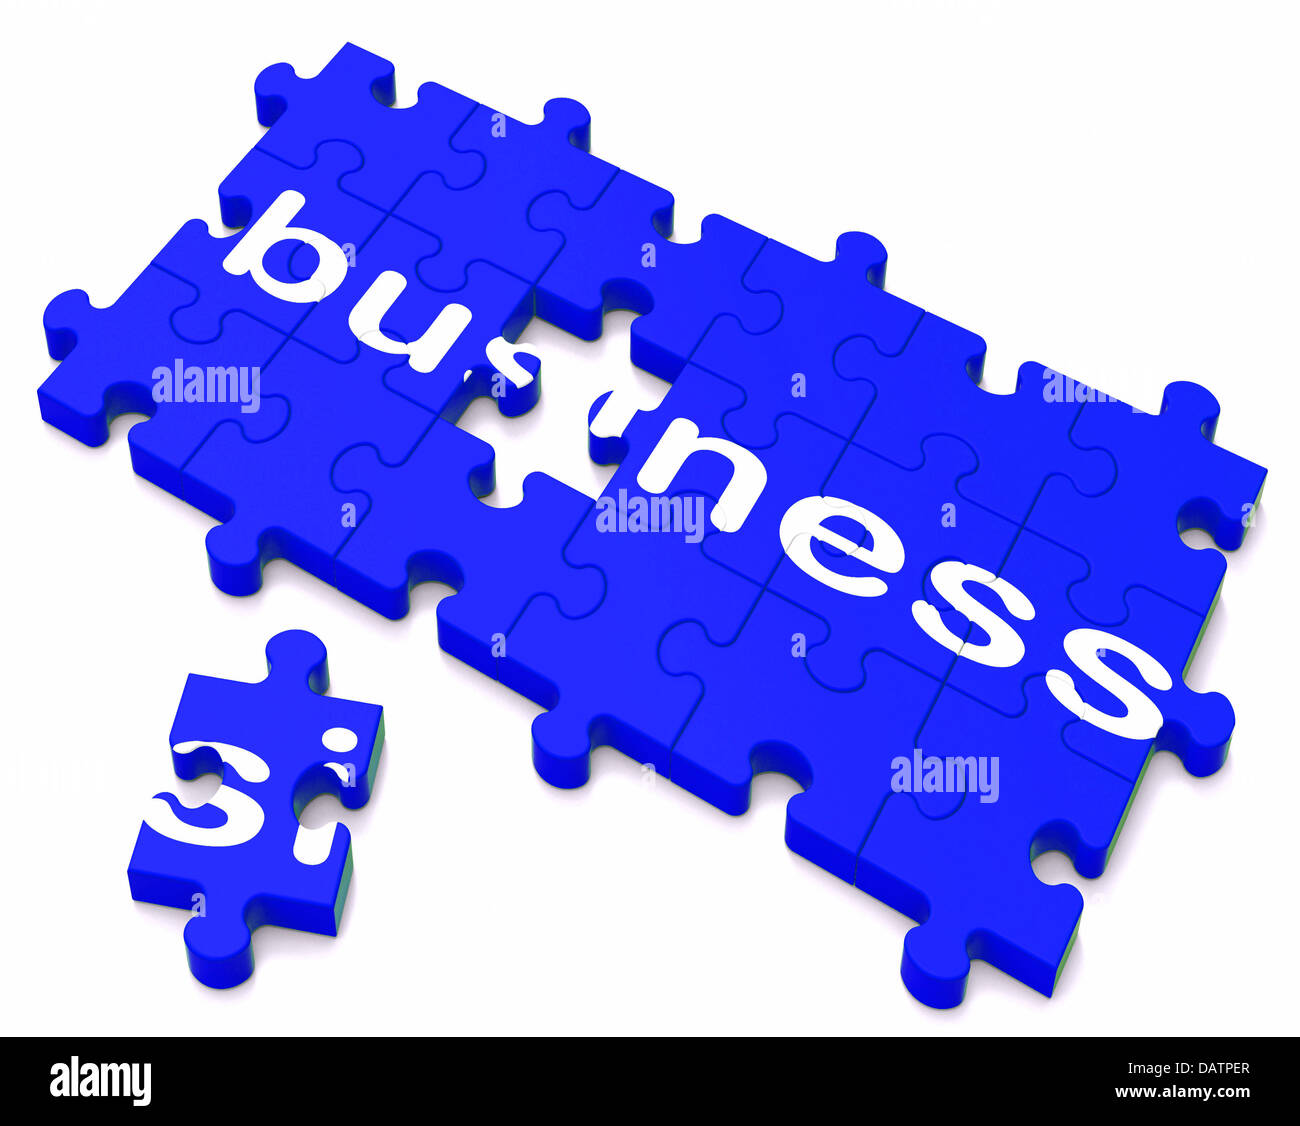 Business Sign Showing Commerce And Deals Stock Photo